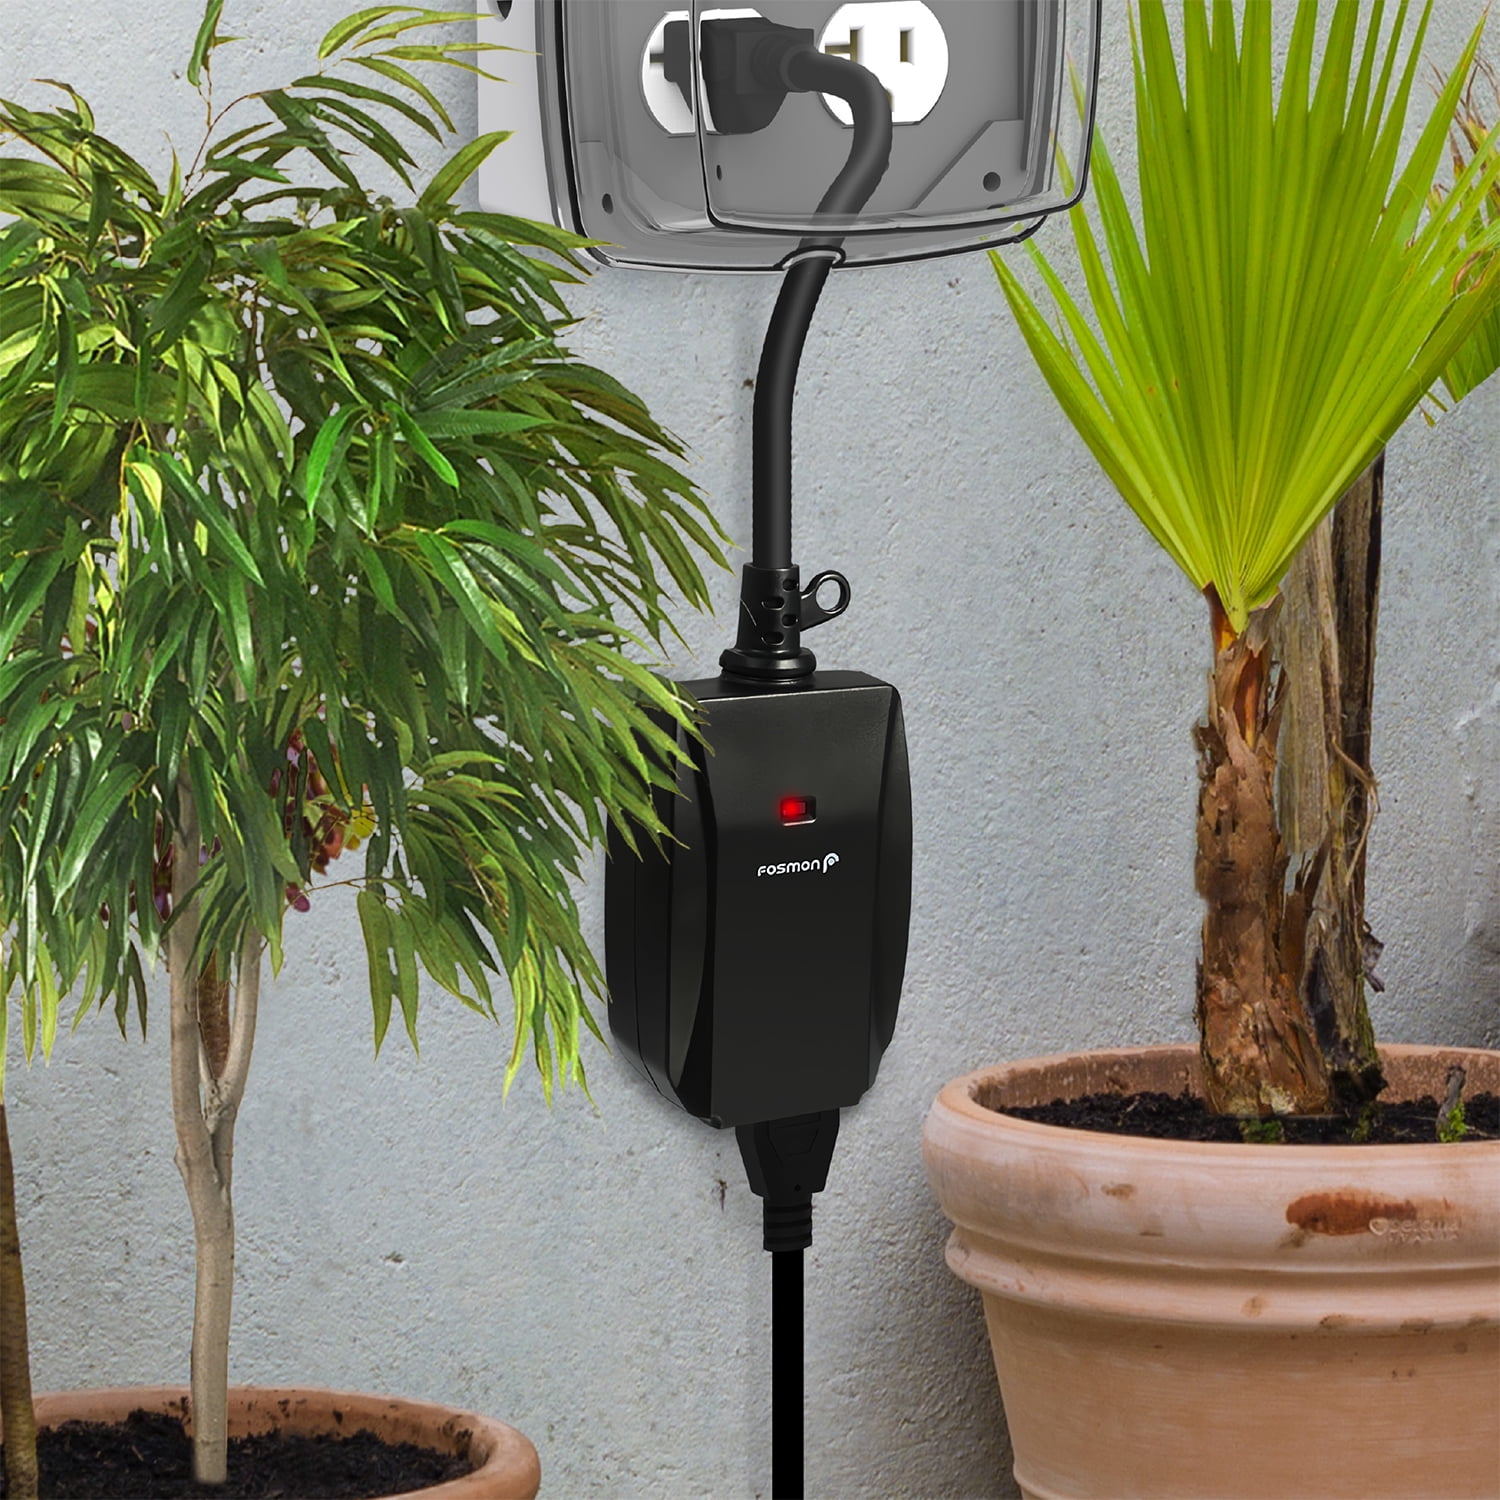 Functional Wireless Outdoor Remote Control Outlet Switch by Fosmon